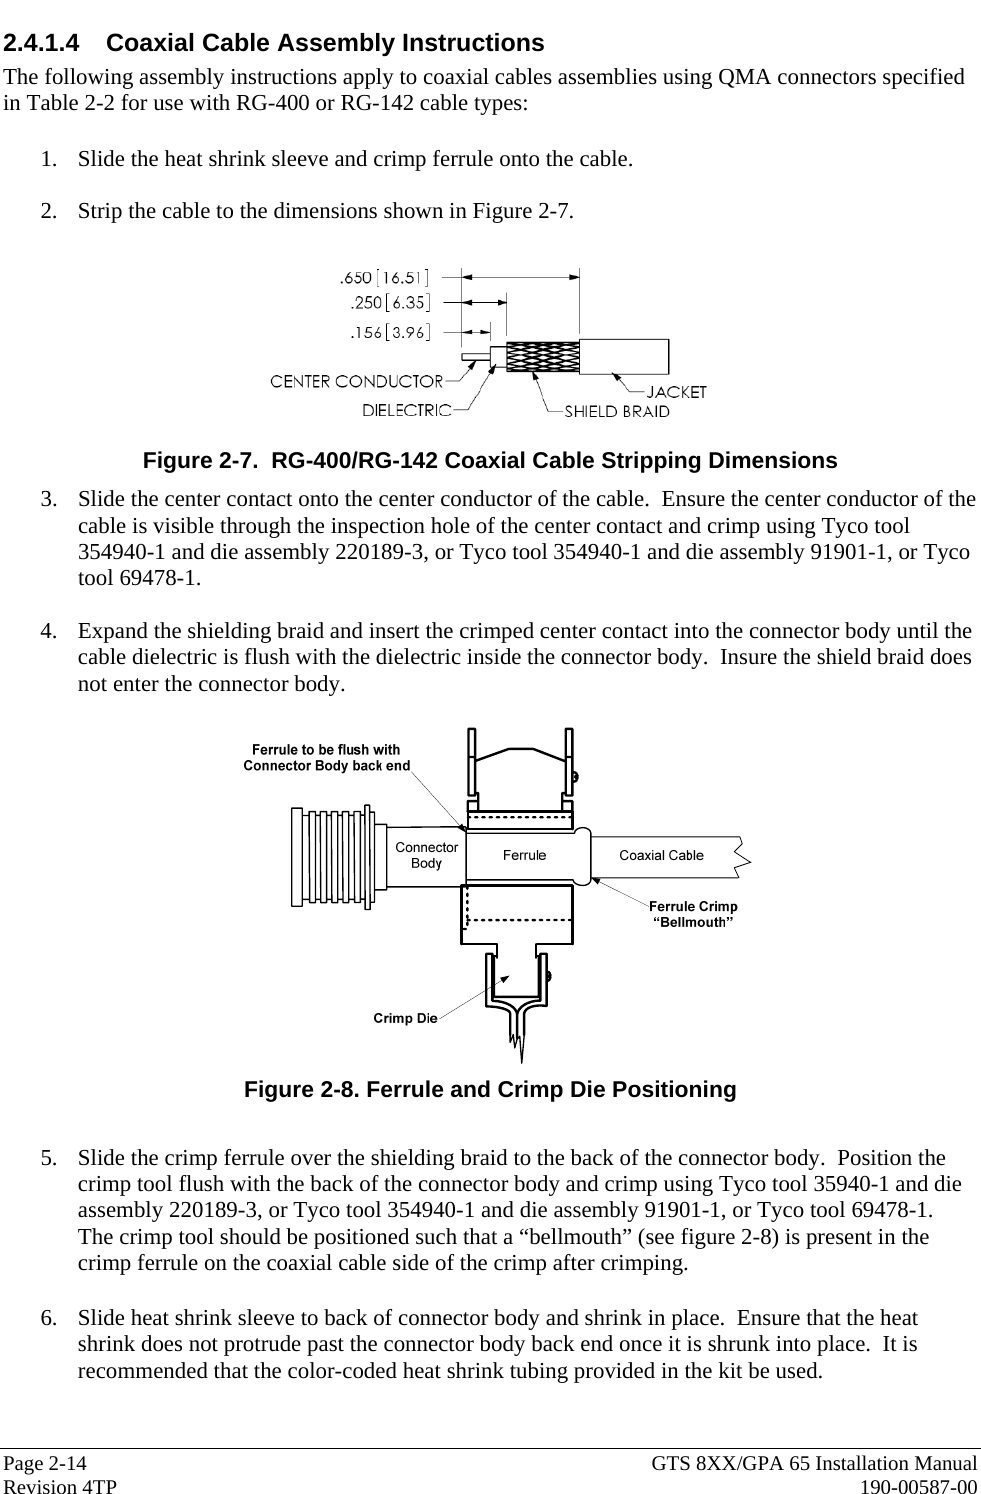  Page 2-14  GTS 8XX/GPA 65 Installation Manual Revision 4TP  190-00587-00 2.4.1.4 Coaxial Cable Assembly Instructions The following assembly instructions apply to coaxial cables assemblies using QMA connectors specified in Table 2-2 for use with RG-400 or RG-142 cable types:  1. Slide the heat shrink sleeve and crimp ferrule onto the cable.  2. Strip the cable to the dimensions shown in Figure 2-7.      Figure 2-7.  RG-400/RG-142 Coaxial Cable Stripping Dimensions 3. Slide the center contact onto the center conductor of the cable.  Ensure the center conductor of the cable is visible through the inspection hole of the center contact and crimp using Tyco tool 354940-1 and die assembly 220189-3, or Tyco tool 354940-1 and die assembly 91901-1, or Tyco tool 69478-1.  4. Expand the shielding braid and insert the crimped center contact into the connector body until the cable dielectric is flush with the dielectric inside the connector body.  Insure the shield braid does not enter the connector body.     Figure 2-8. Ferrule and Crimp Die Positioning  5. Slide the crimp ferrule over the shielding braid to the back of the connector body.  Position the crimp tool flush with the back of the connector body and crimp using Tyco tool 35940-1 and die assembly 220189-3, or Tyco tool 354940-1 and die assembly 91901-1, or Tyco tool 69478-1.  The crimp tool should be positioned such that a “bellmouth” (see figure 2-8) is present in the crimp ferrule on the coaxial cable side of the crimp after crimping.   6. Slide heat shrink sleeve to back of connector body and shrink in place.  Ensure that the heat shrink does not protrude past the connector body back end once it is shrunk into place.  It is recommended that the color-coded heat shrink tubing provided in the kit be used.   